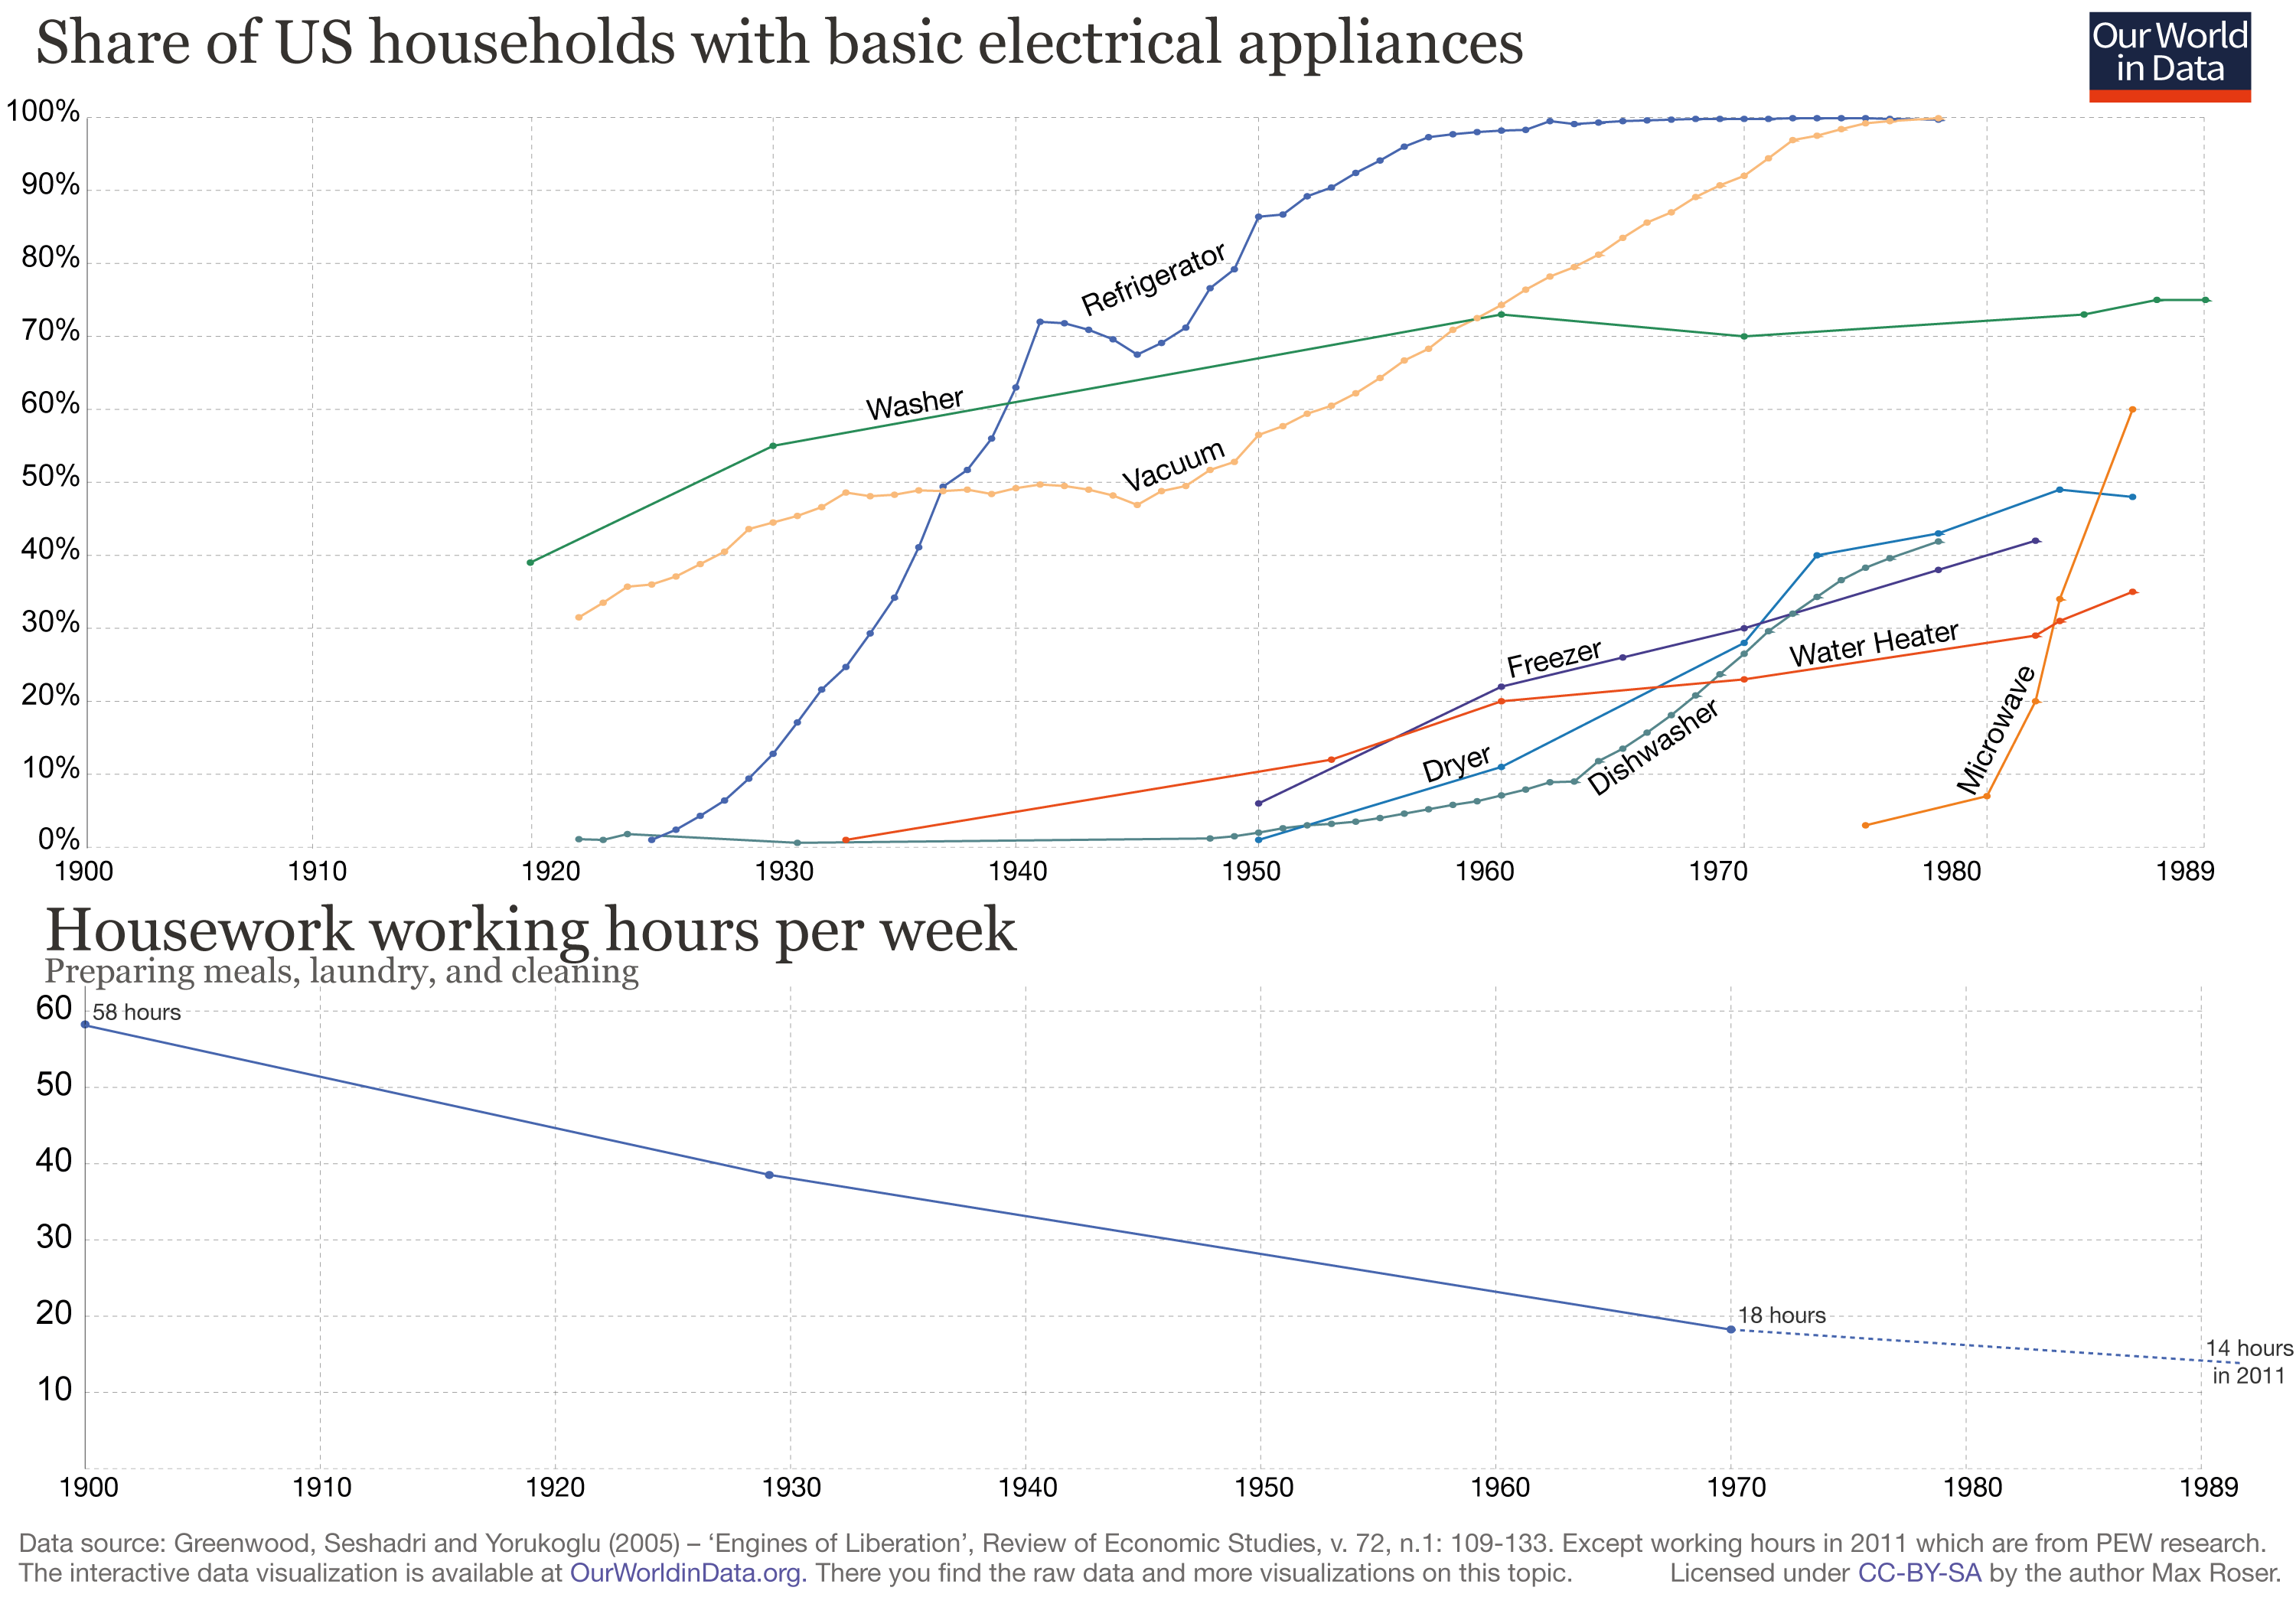 Line charts of the share of US households with basic electrical appliances, such as refrigerators and microwaves, and of housework working hours per week to prepare meals, do the laundry and the cleaning.  Basic electrical appliances have soared over the last century, and housework working hours have steadily declined.